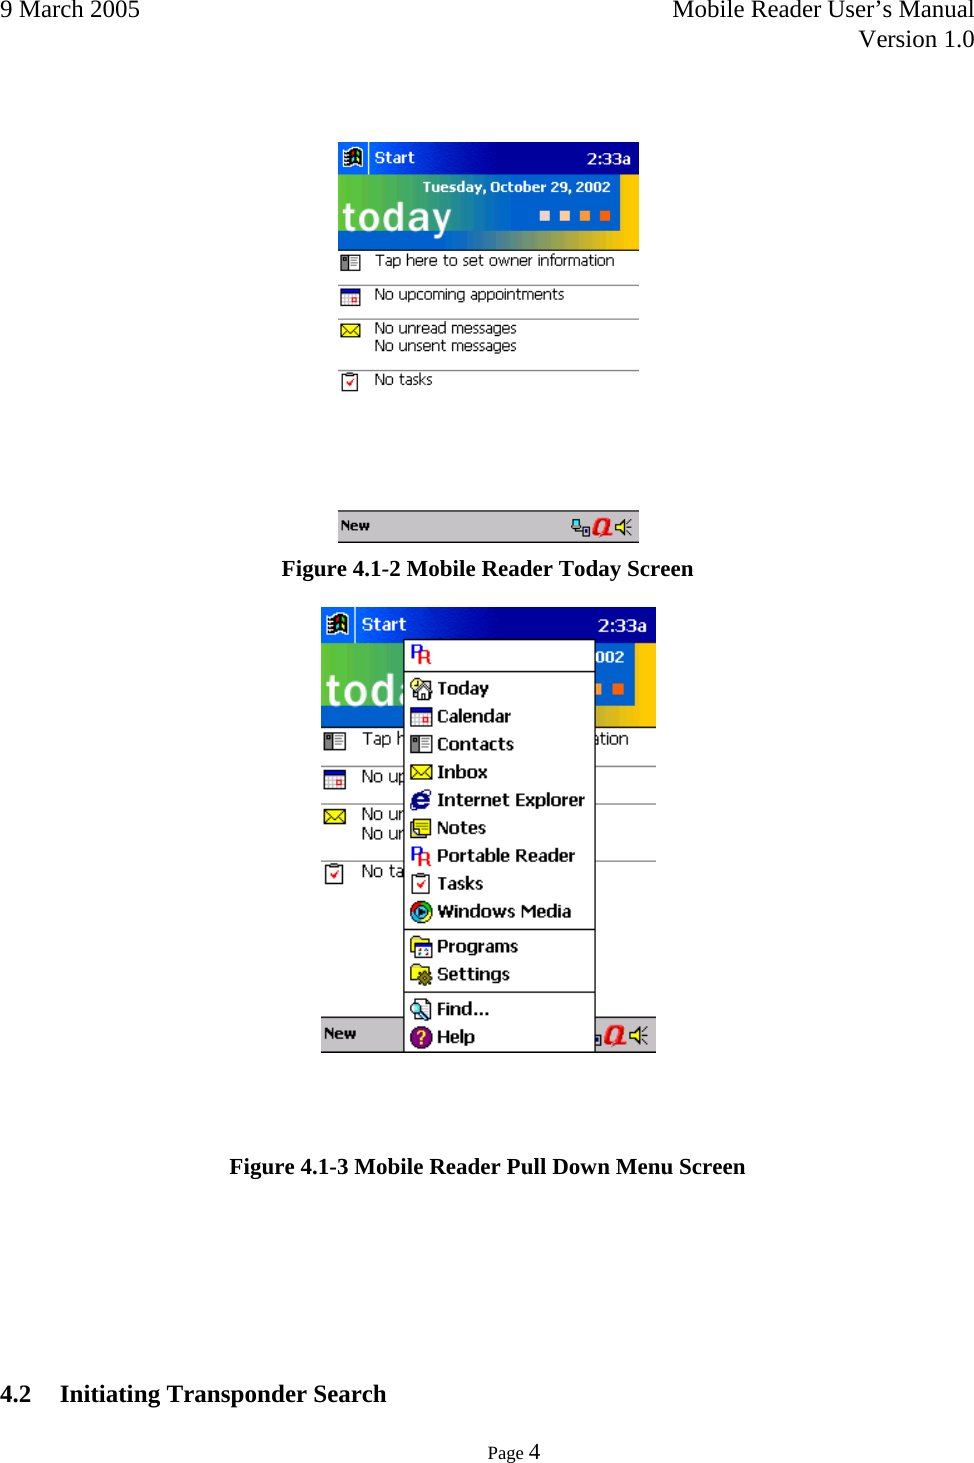 9 March 2005    Mobile Reader User’s Manual   Version 1.0      Page 4     Figure 4.1-2 Mobile Reader Today Screen     Figure 4.1-3 Mobile Reader Pull Down Menu Screen      4.2 Initiating Transponder Search 